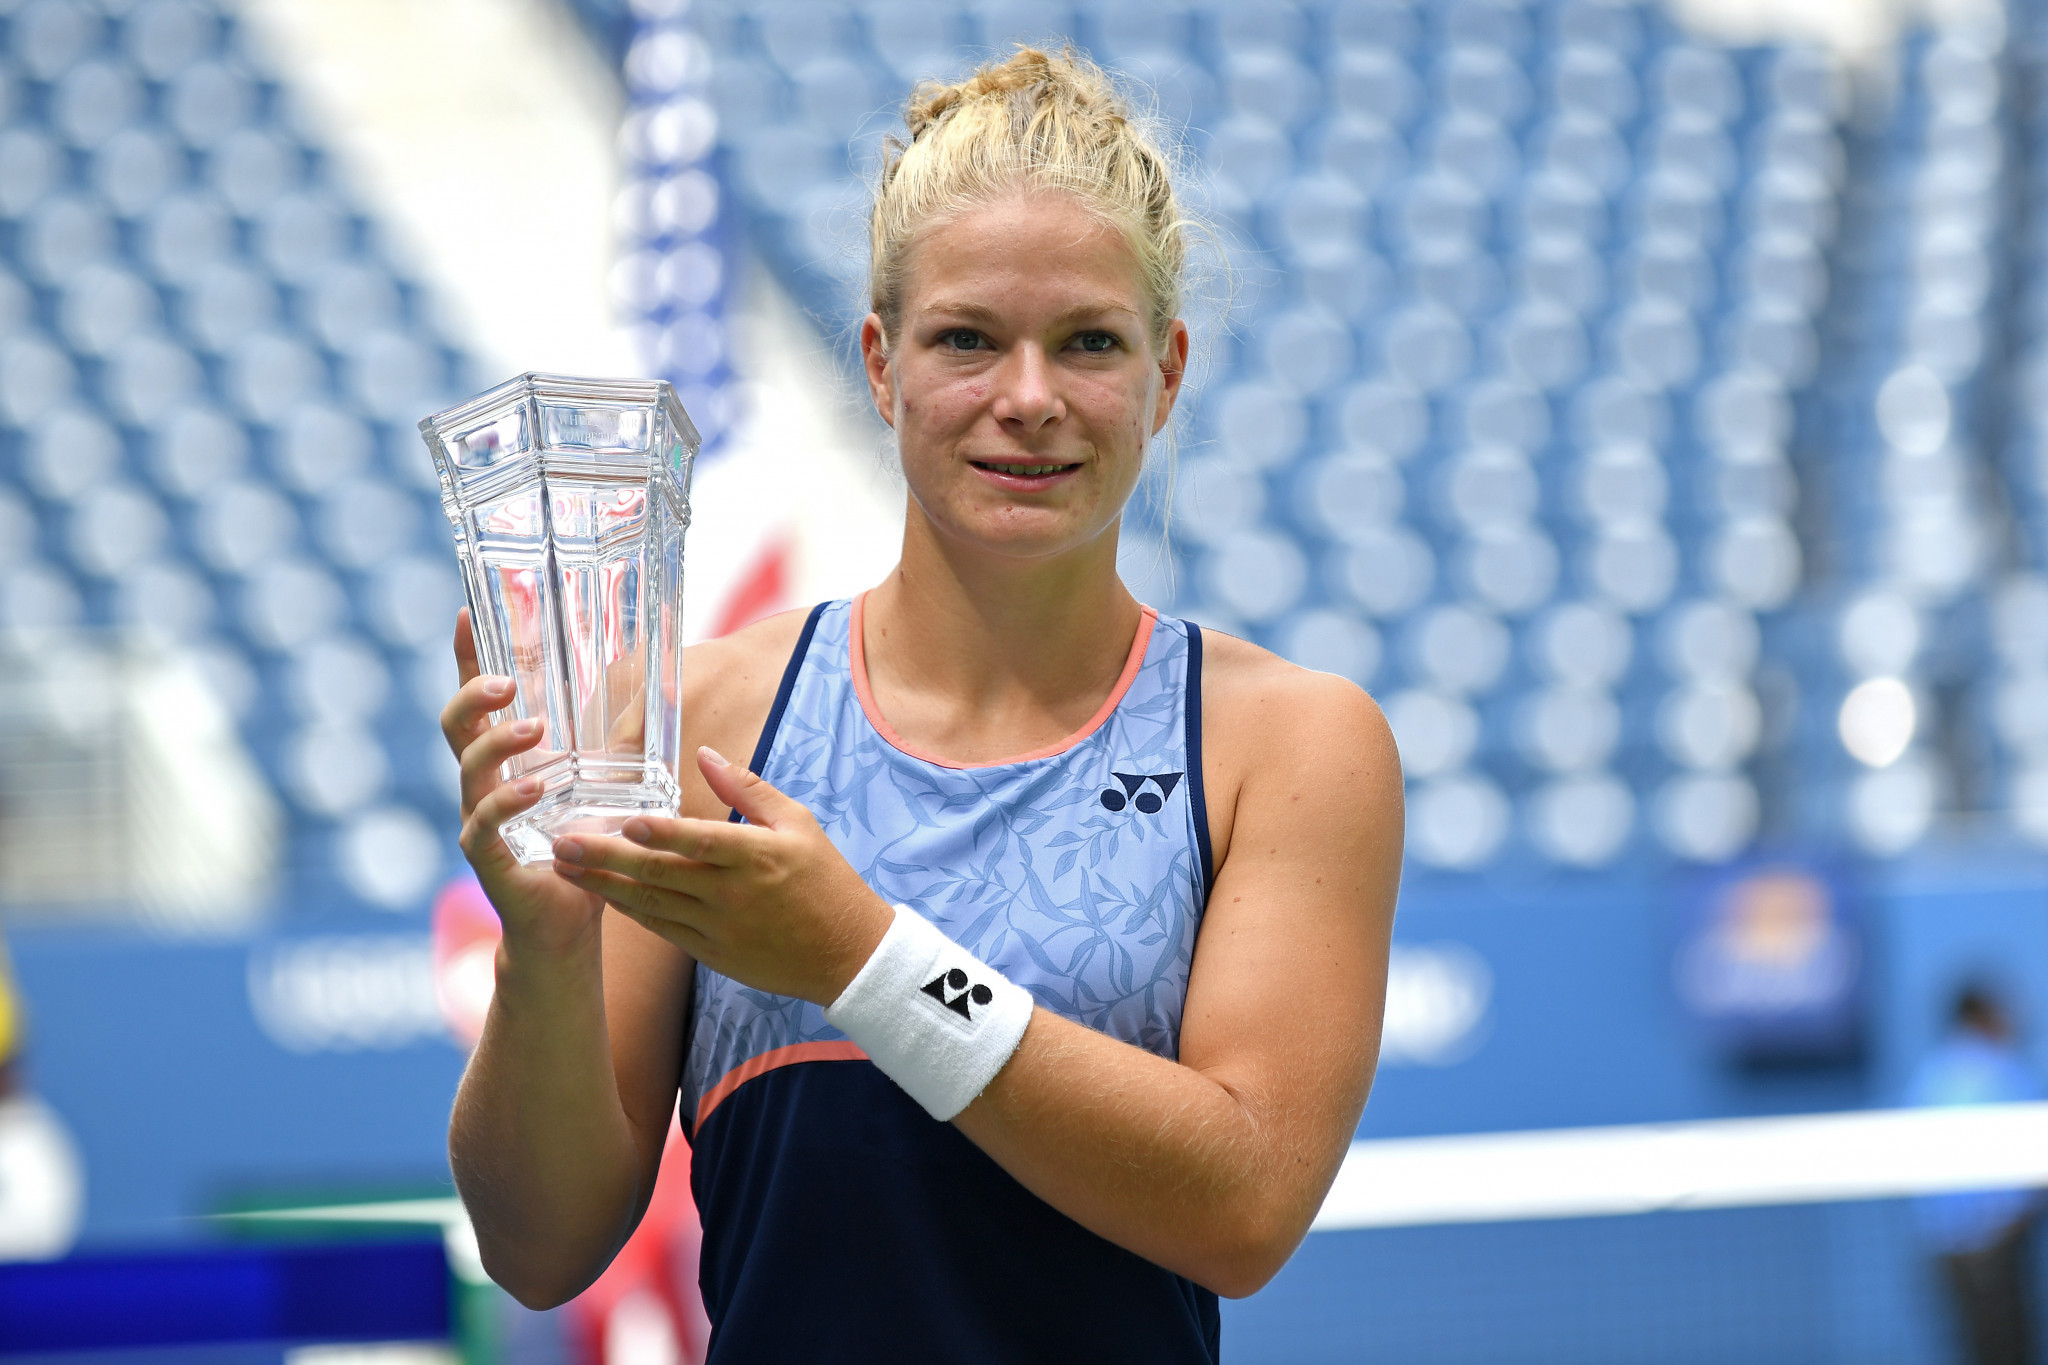 Diede de Groot won the US Open singles title in 2019, taking her singles Grand Slam tally to seven ©Getty Images